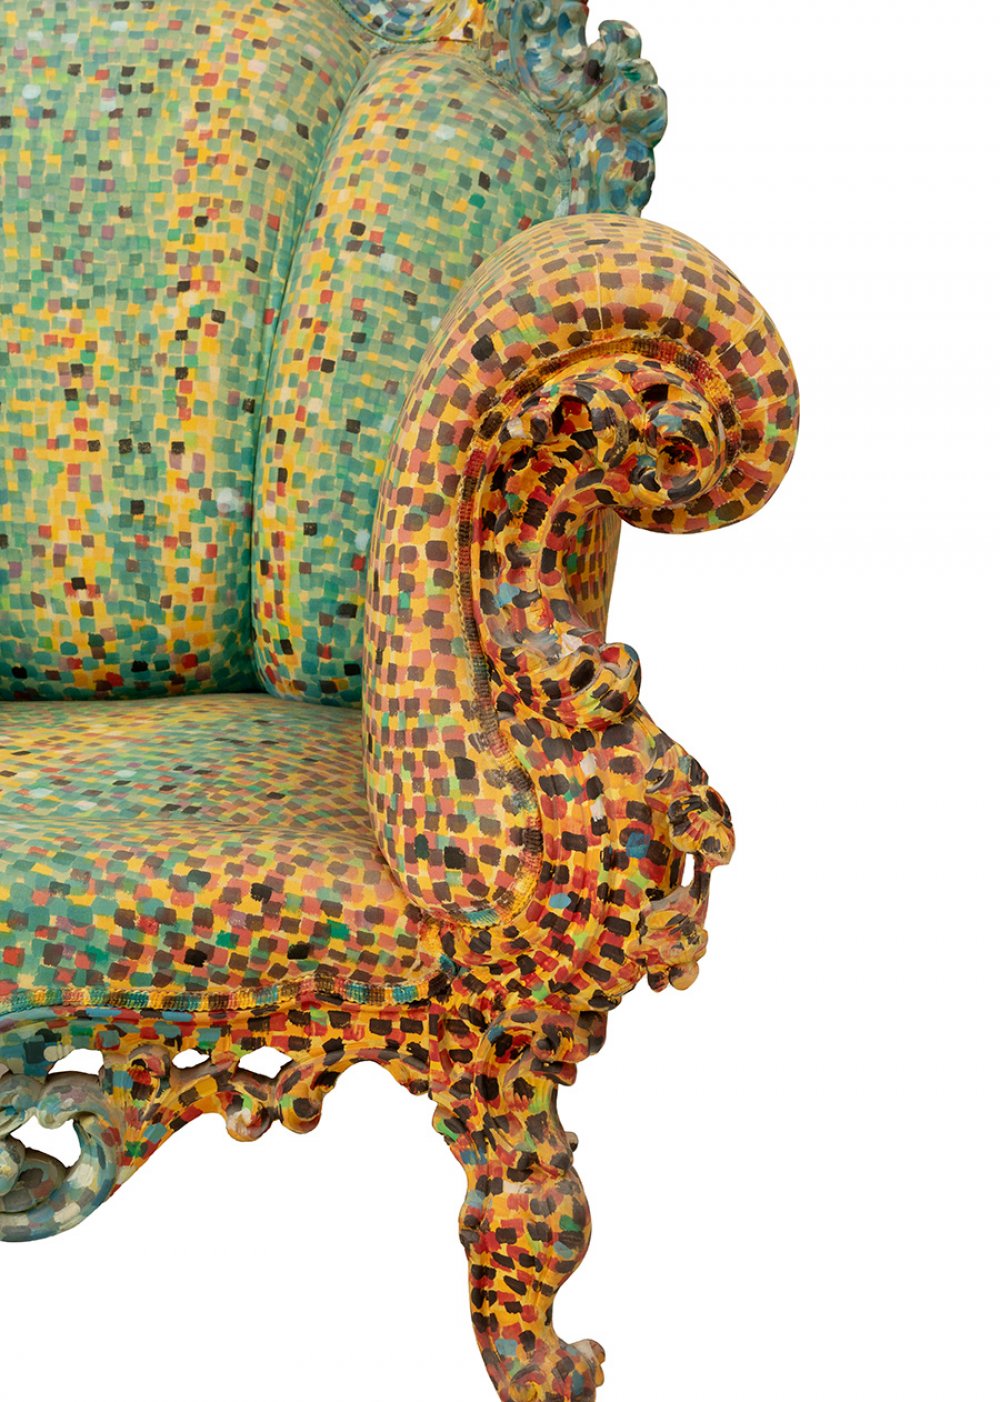 ALESSANDRO MENDINI (Milan, 1931-2019) and STUDIO ALCHIMIA.Poltrona Proust" armchair.Early edition, - Image 2 of 7